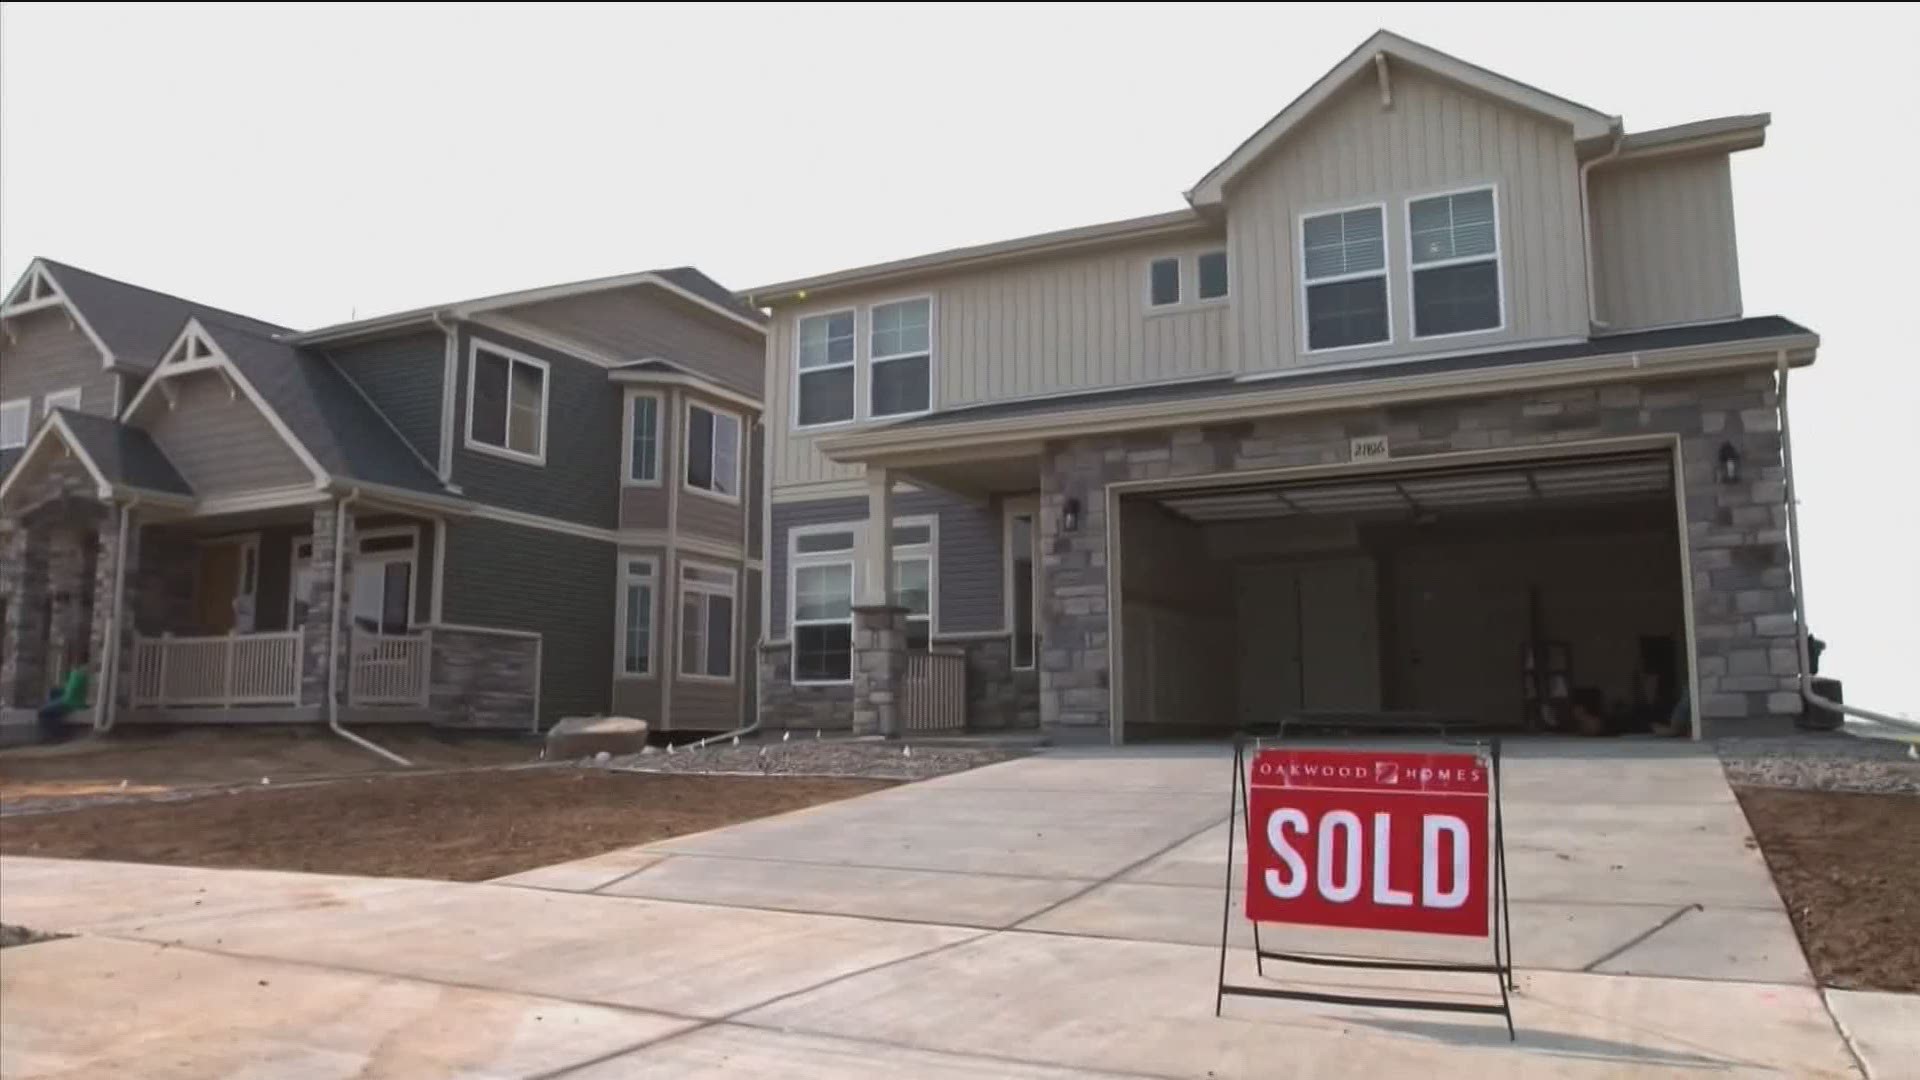 Boise Regional Realtors reports that the median sales price was almost $407,000 in October -- meaning half sold for more and half sold for less.